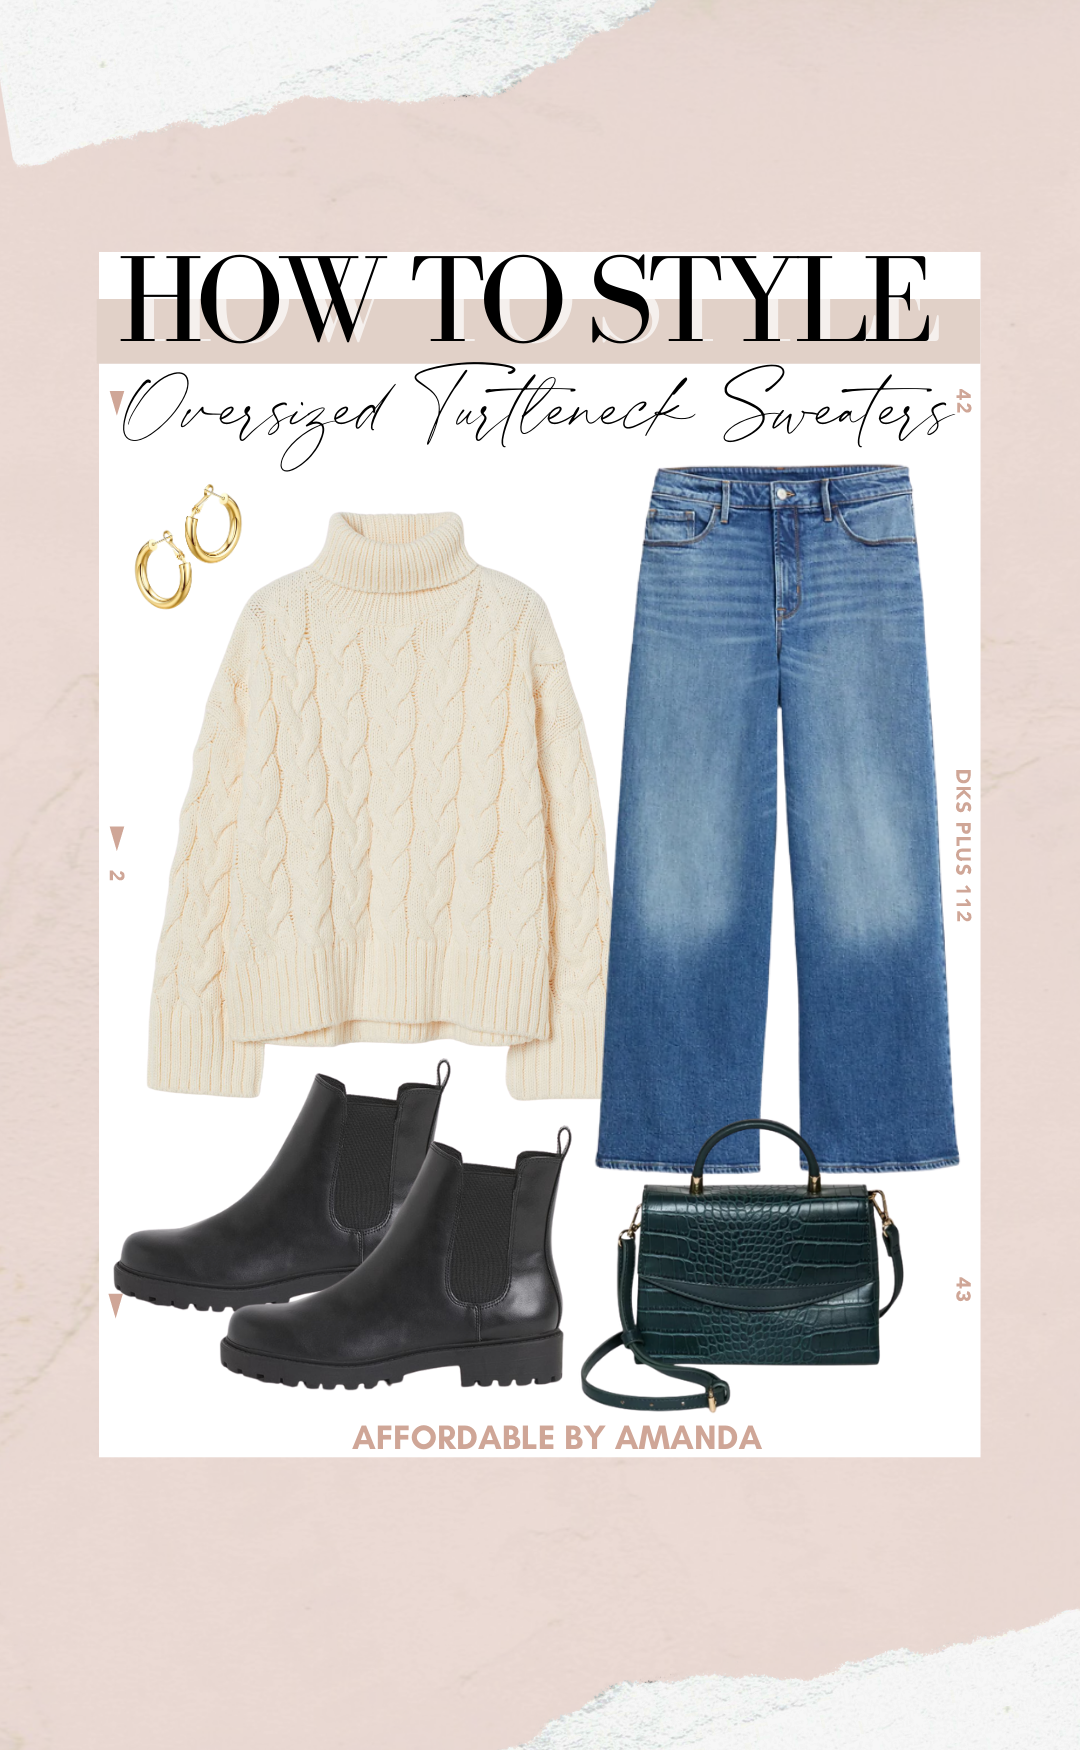 How To Wear An Oversized Turtleneck Sweater - SimplyChristianne